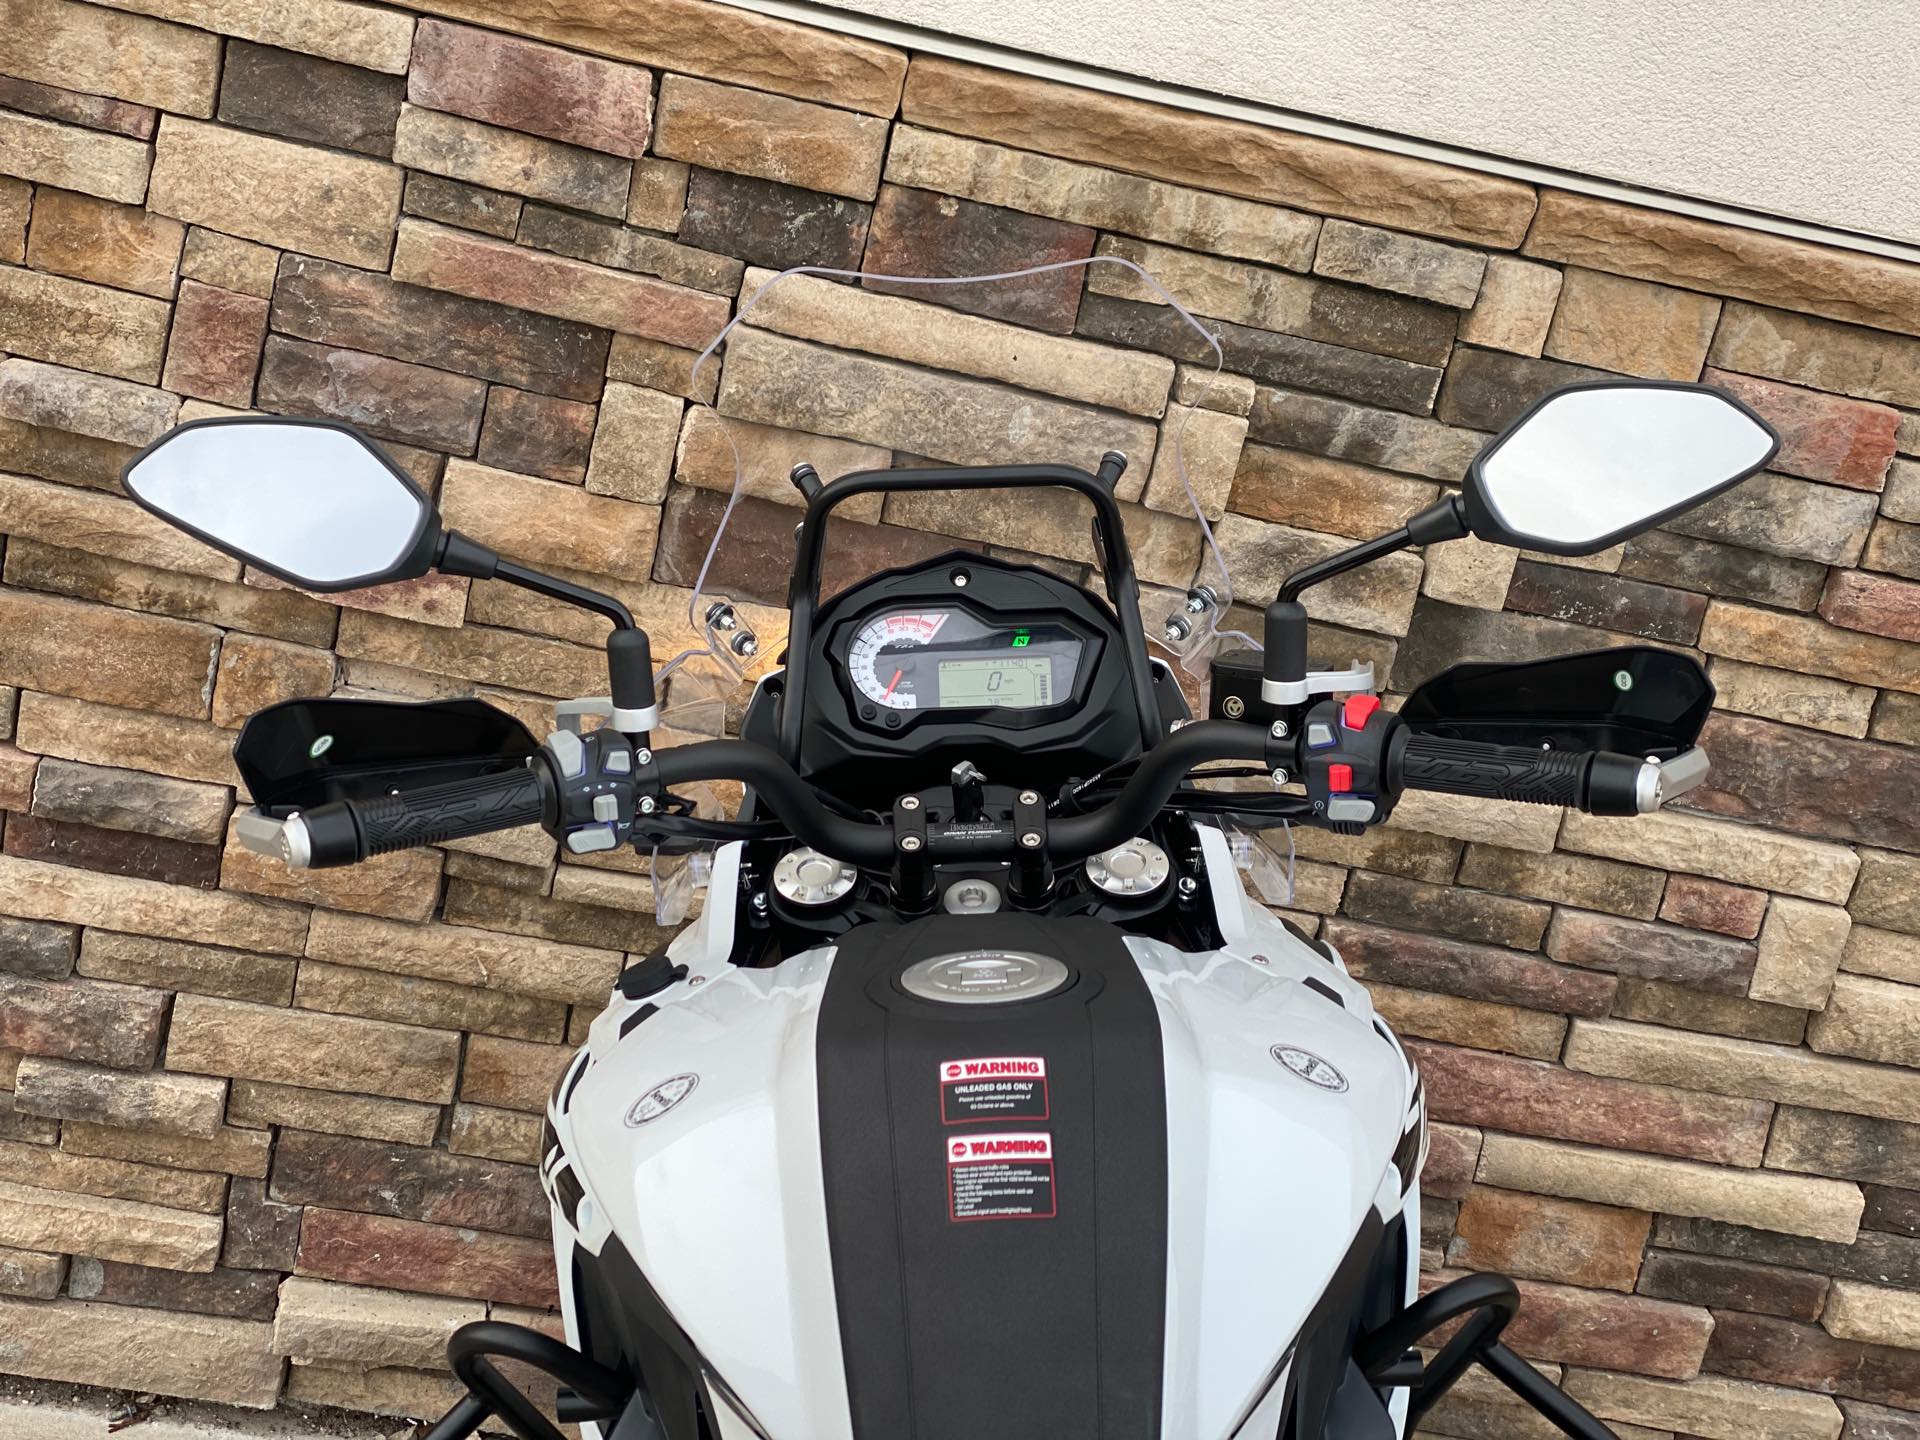 2022 Benelli TRK 502 X at Head Indian Motorcycle